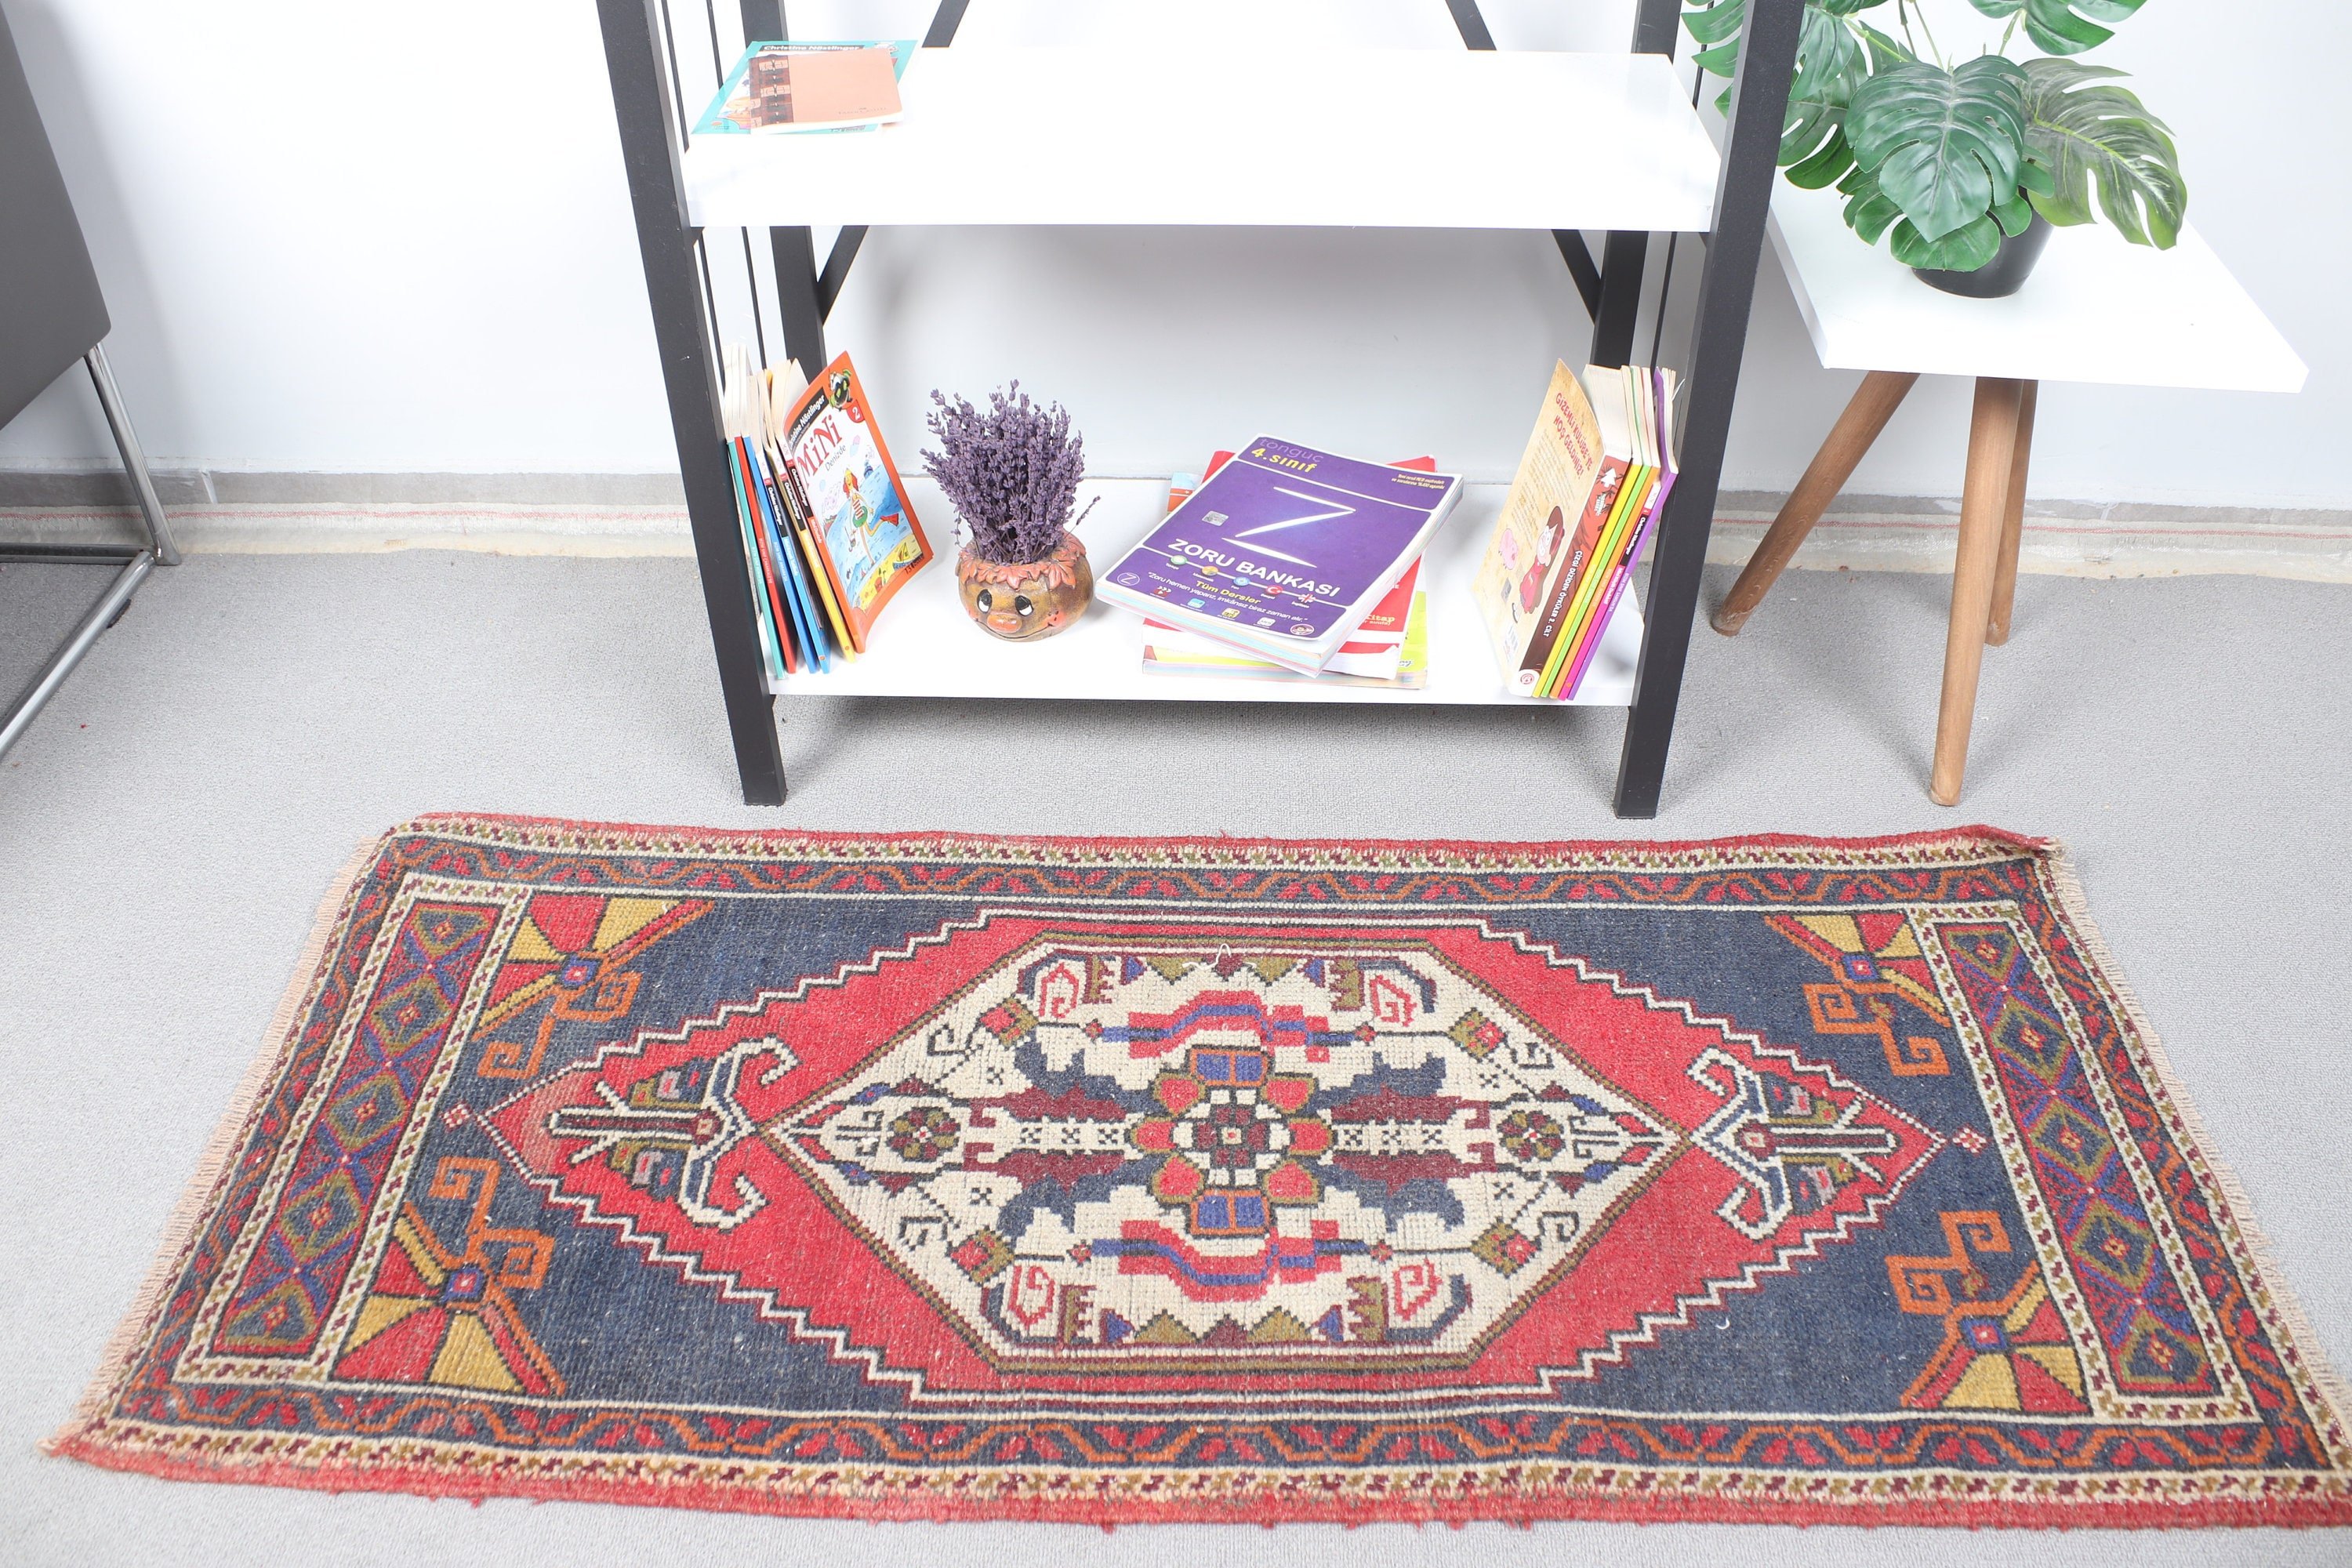 Entry Rug, Turkish Rug, Red Home Decor Rugs, Floor Rug, Car Mat Rug, Antique Rugs, 1.9x4.3 ft Small Rug, Vintage Rug, Rugs for Door Mat